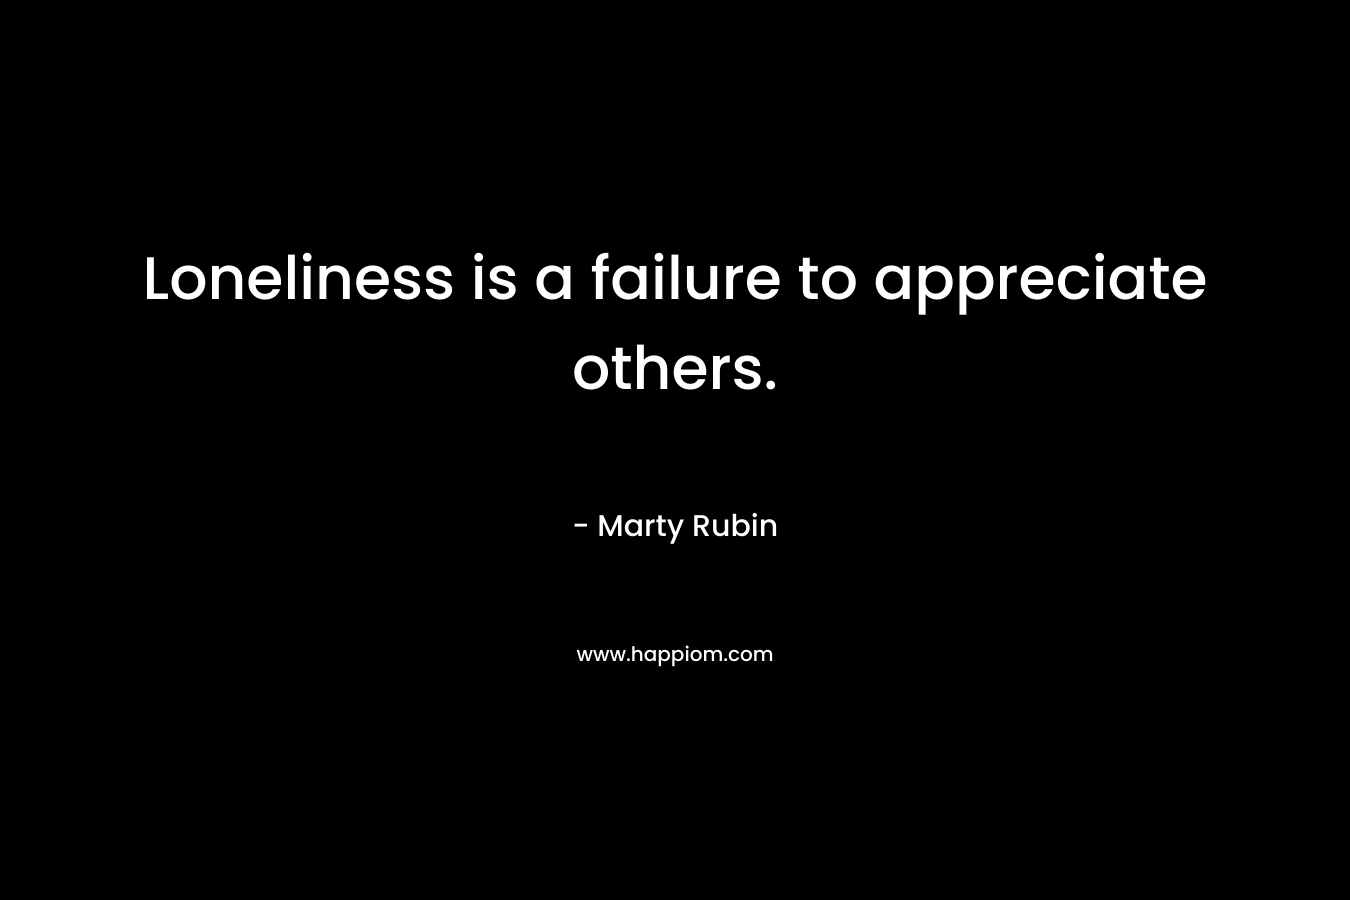 Loneliness is a failure to appreciate others.